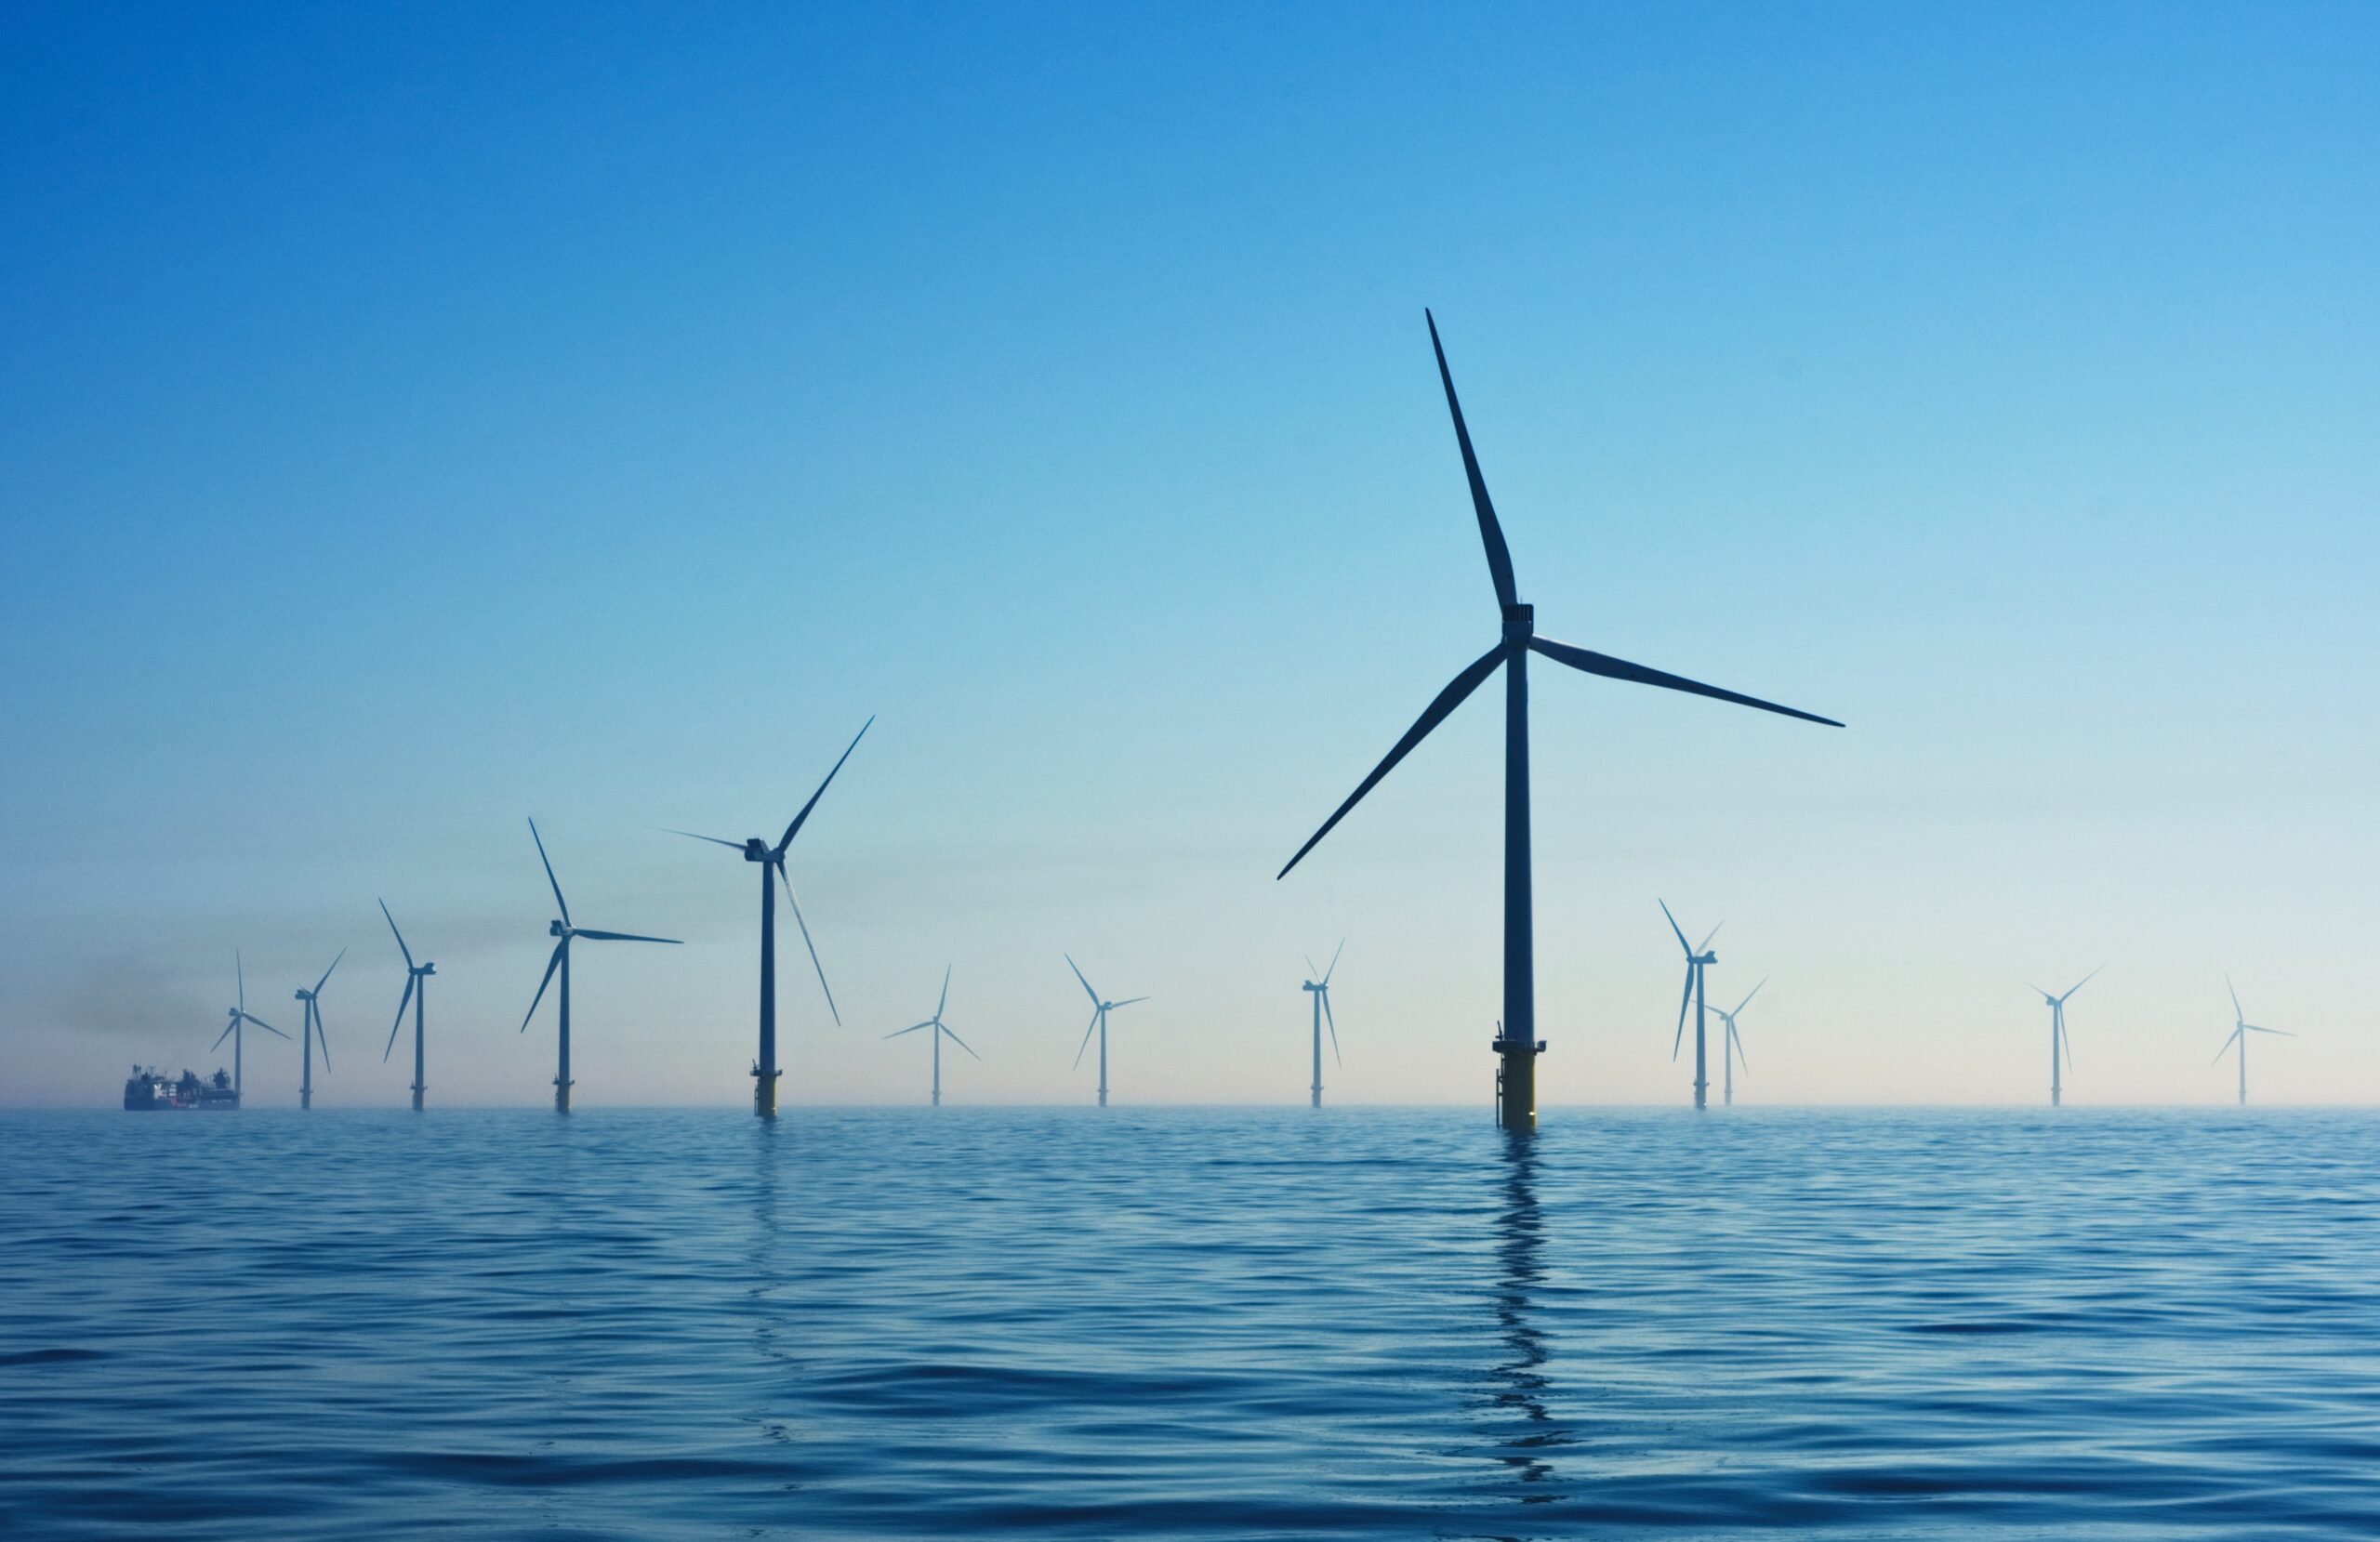 University of Edinburgh Secures Grant To Continue Developing Wind Turbine Recycling Technology.